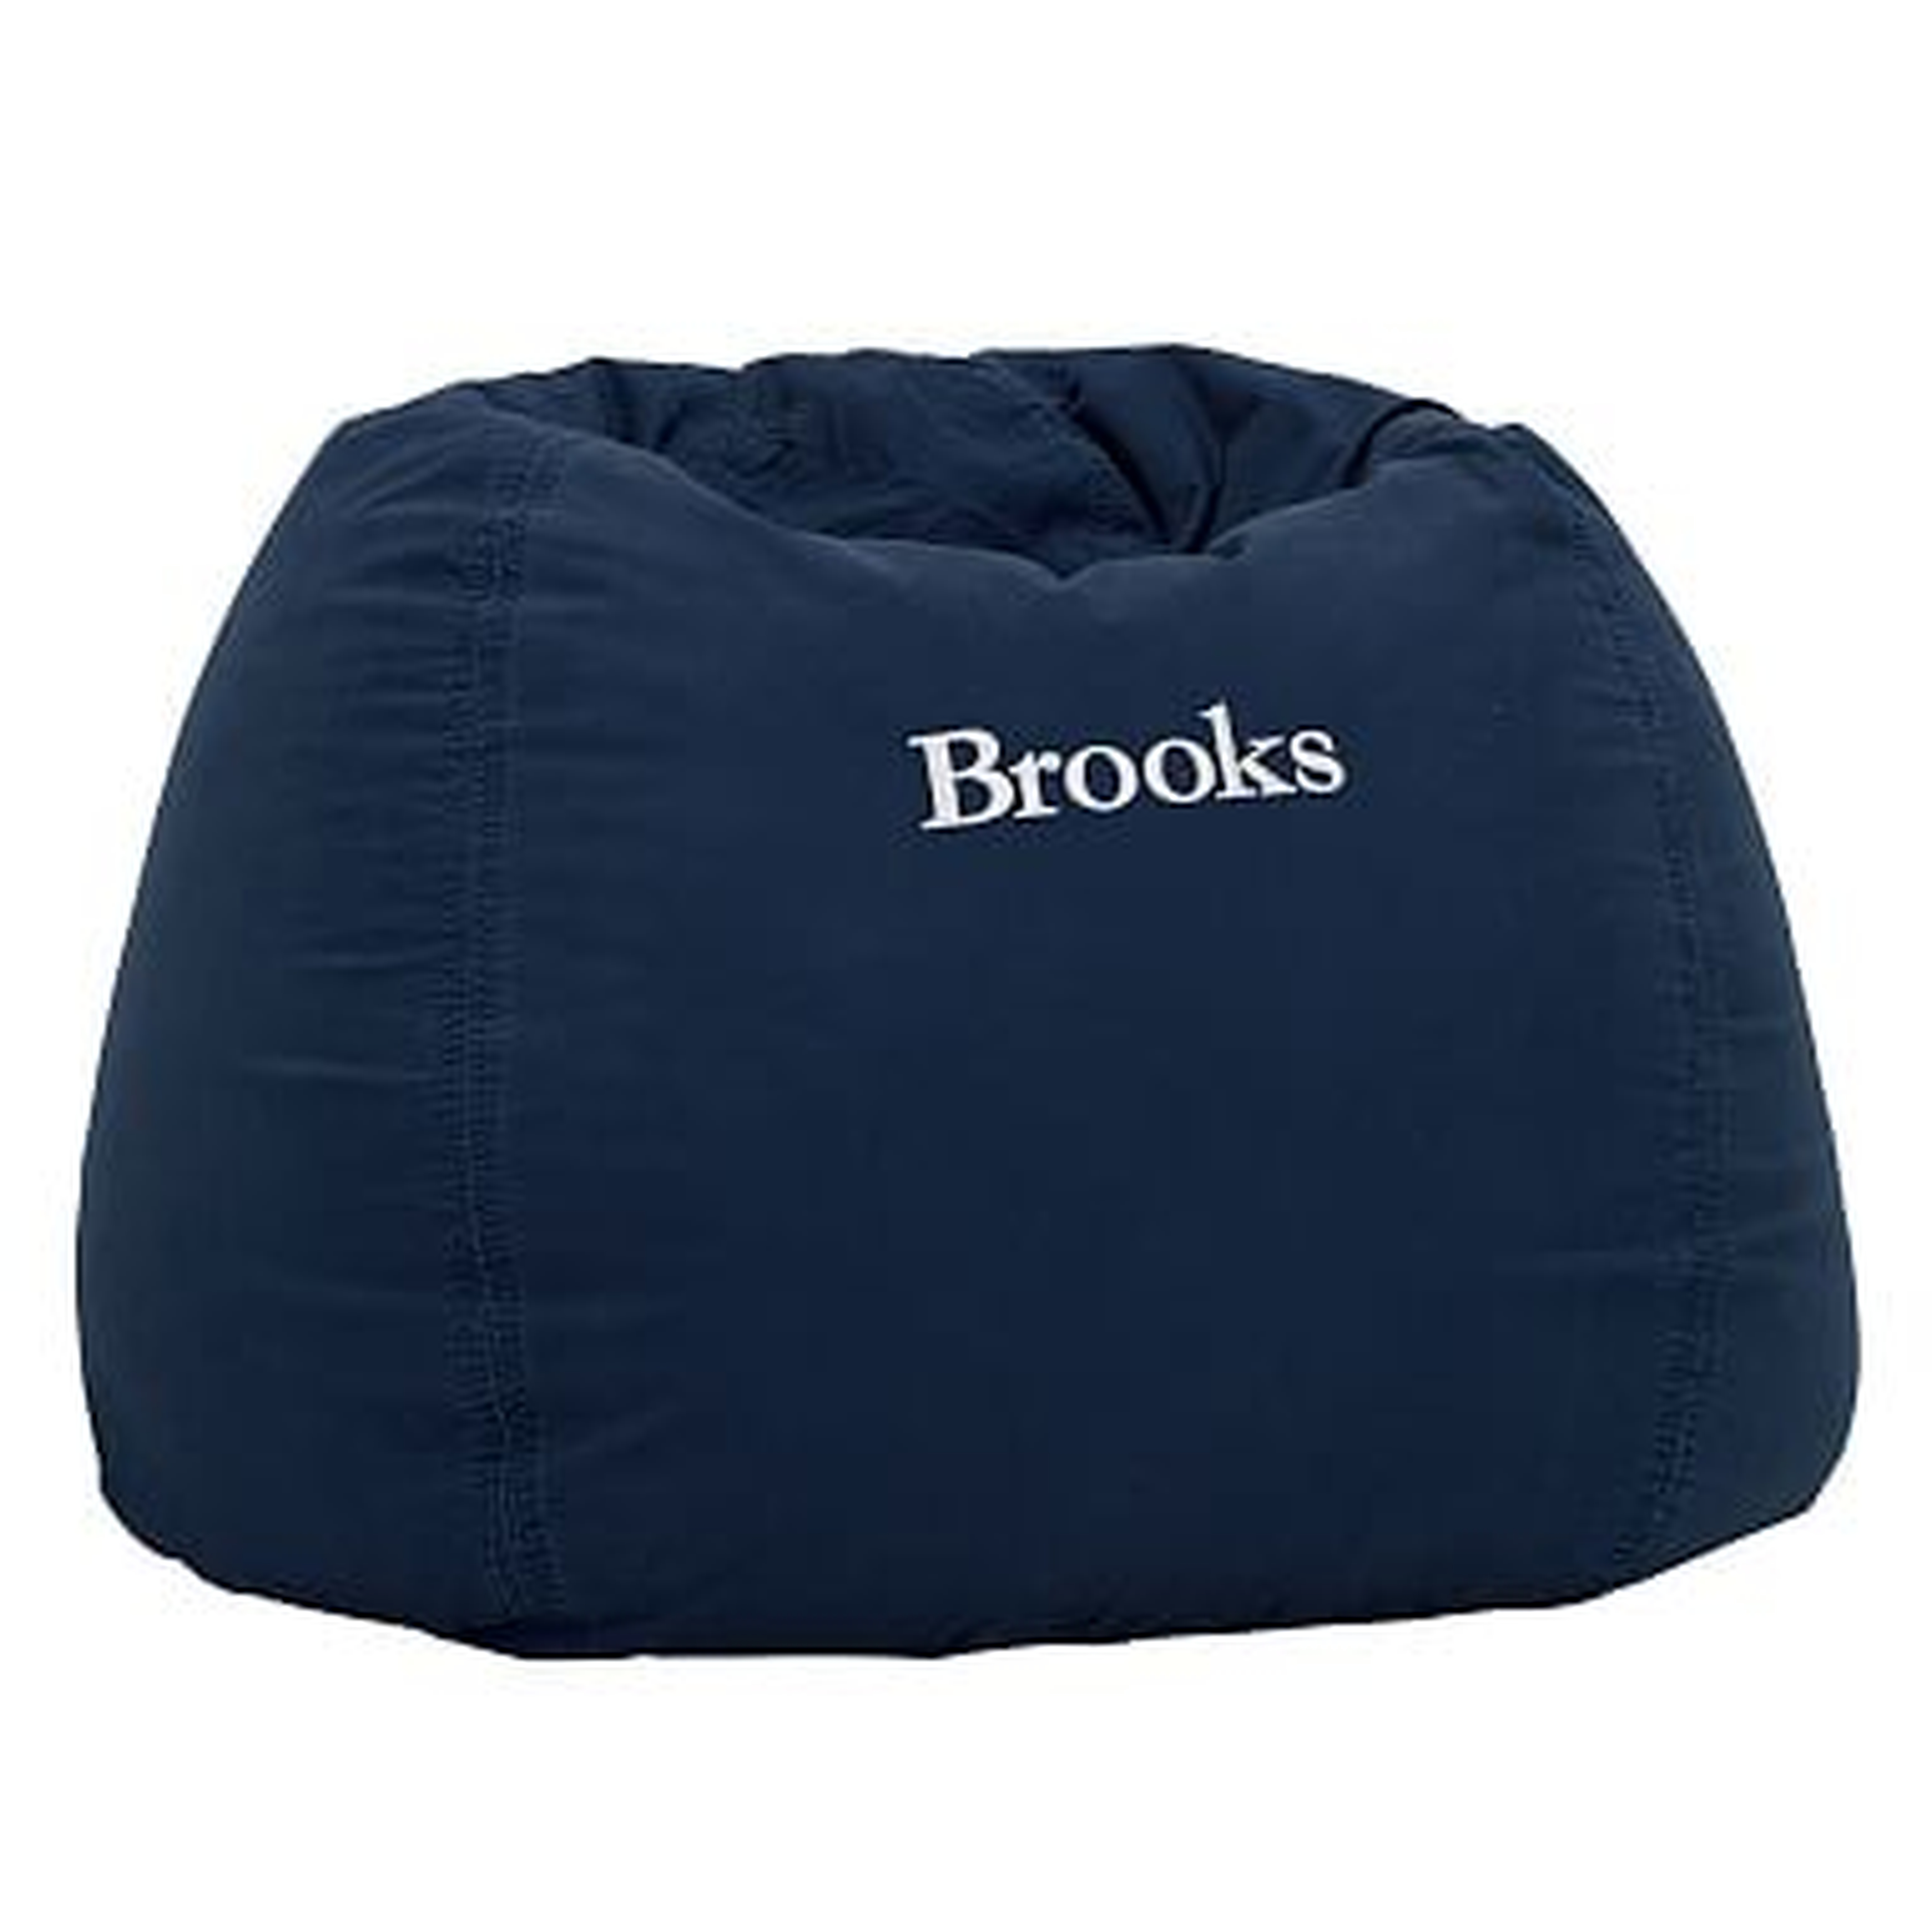 Navy Washed Twill Large Beanbag Slipcover + Beanbag Insert - Pottery Barn Teen